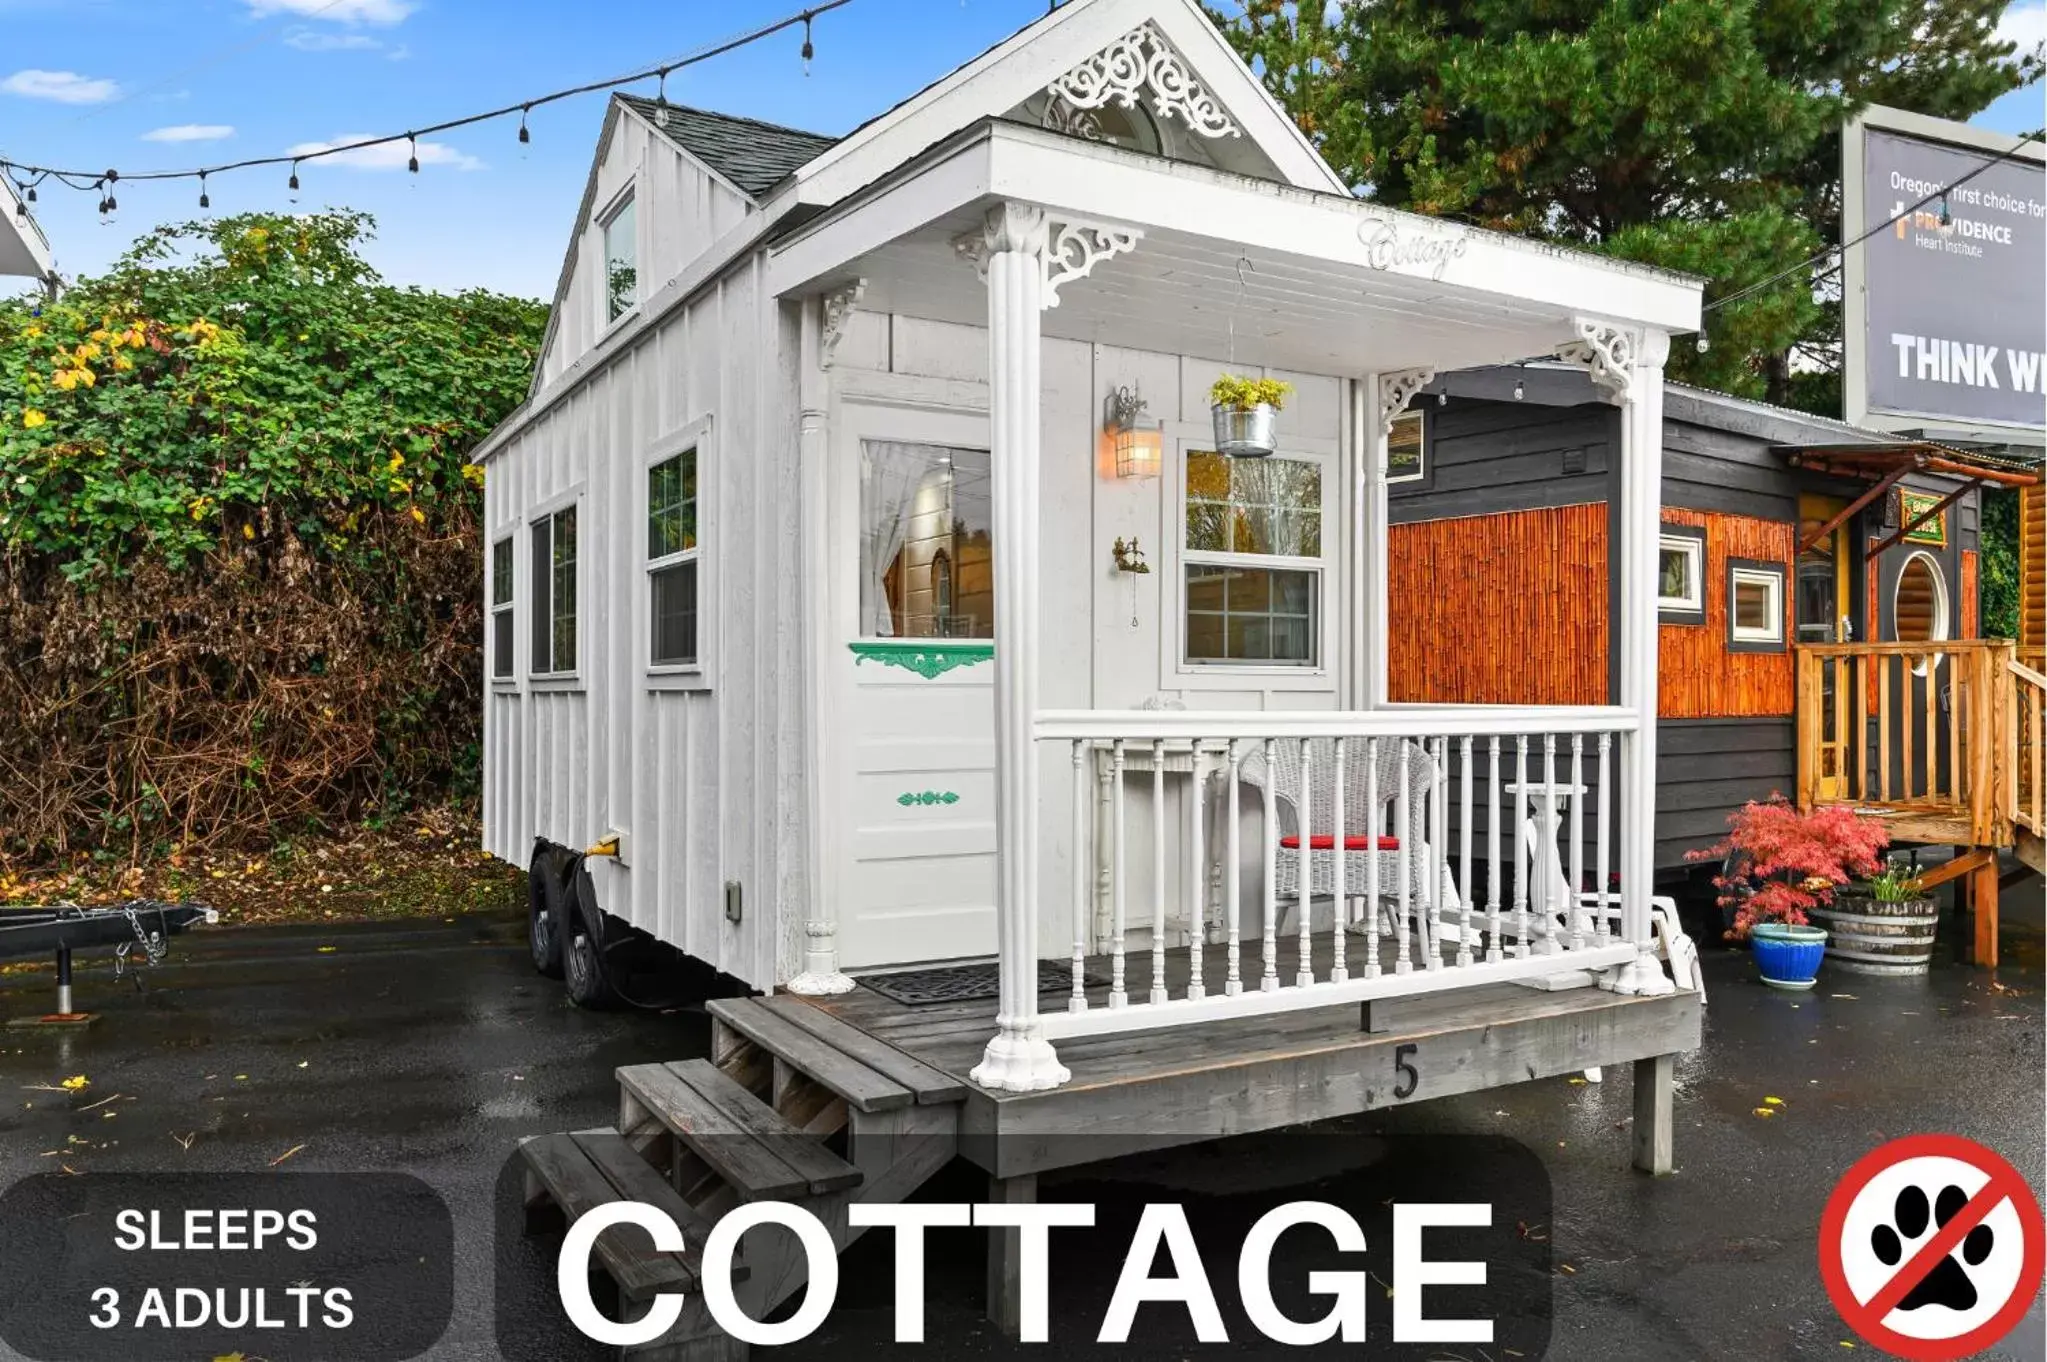 Property Building in Tiny Digs - Hotel of Tiny Houses